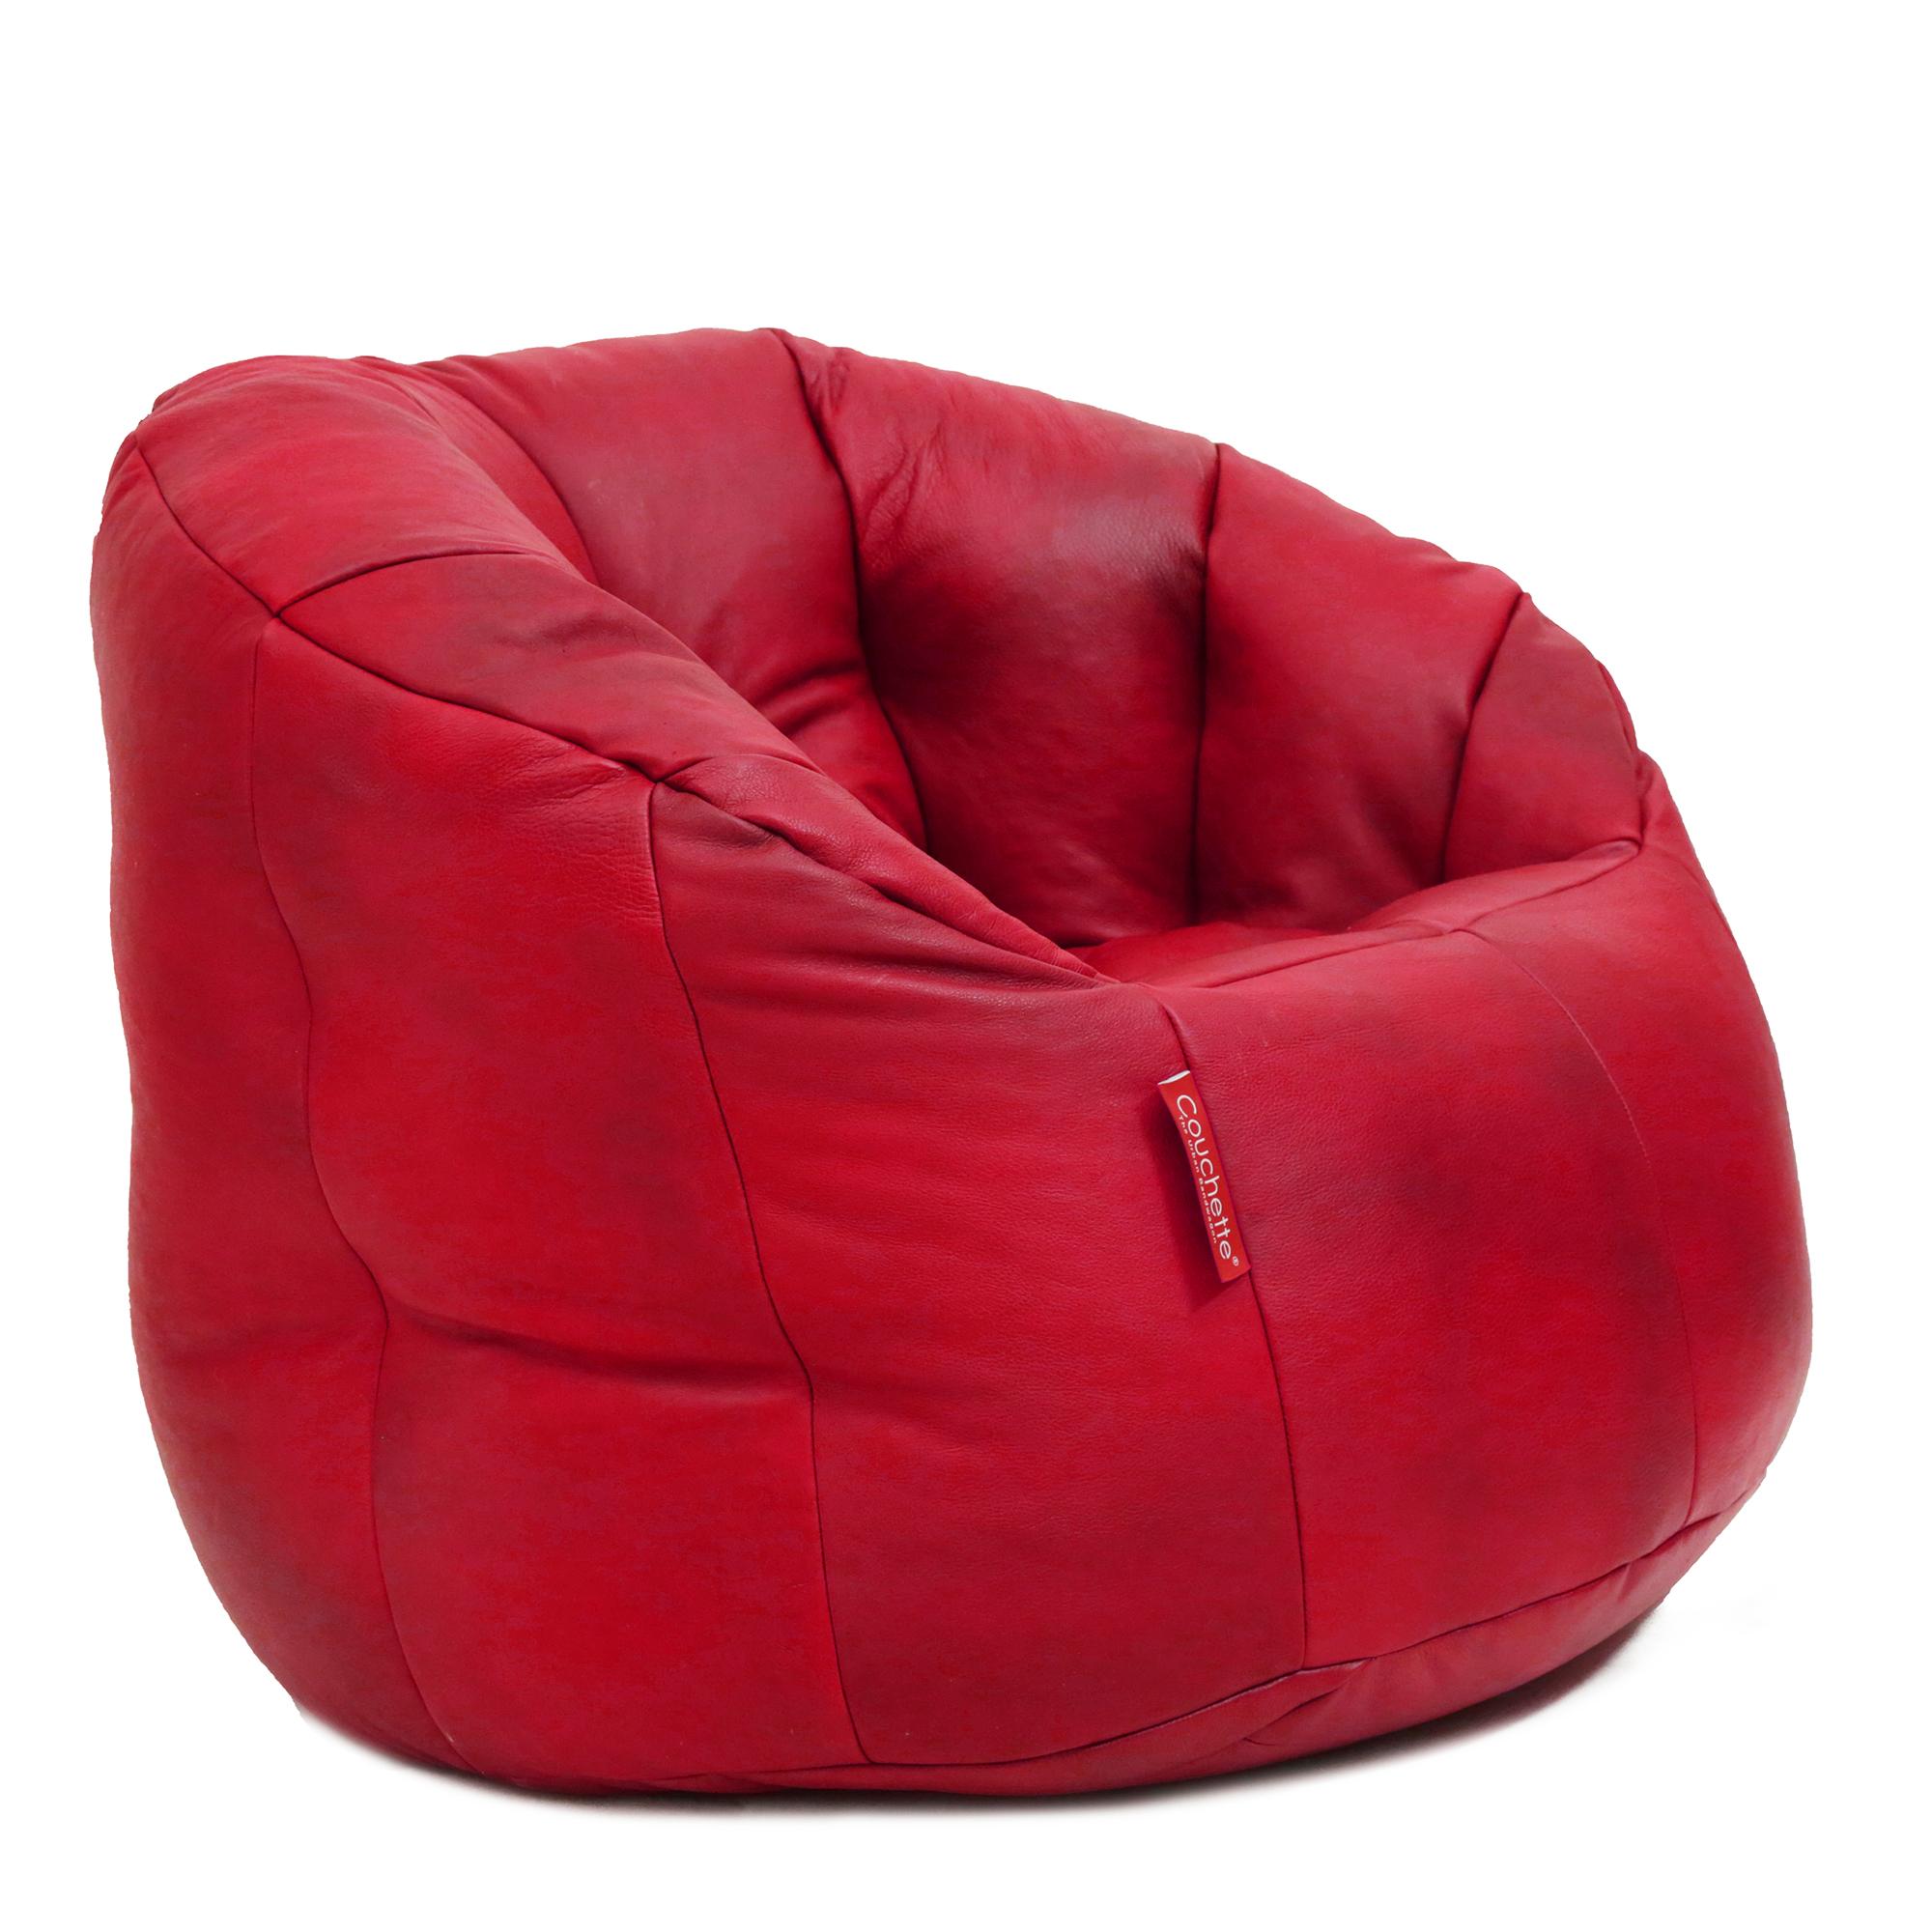 Novelty Bean Bag Couchette Price Starting From Rs 1,499/Unit | Find  Verified Sellers at Justdial